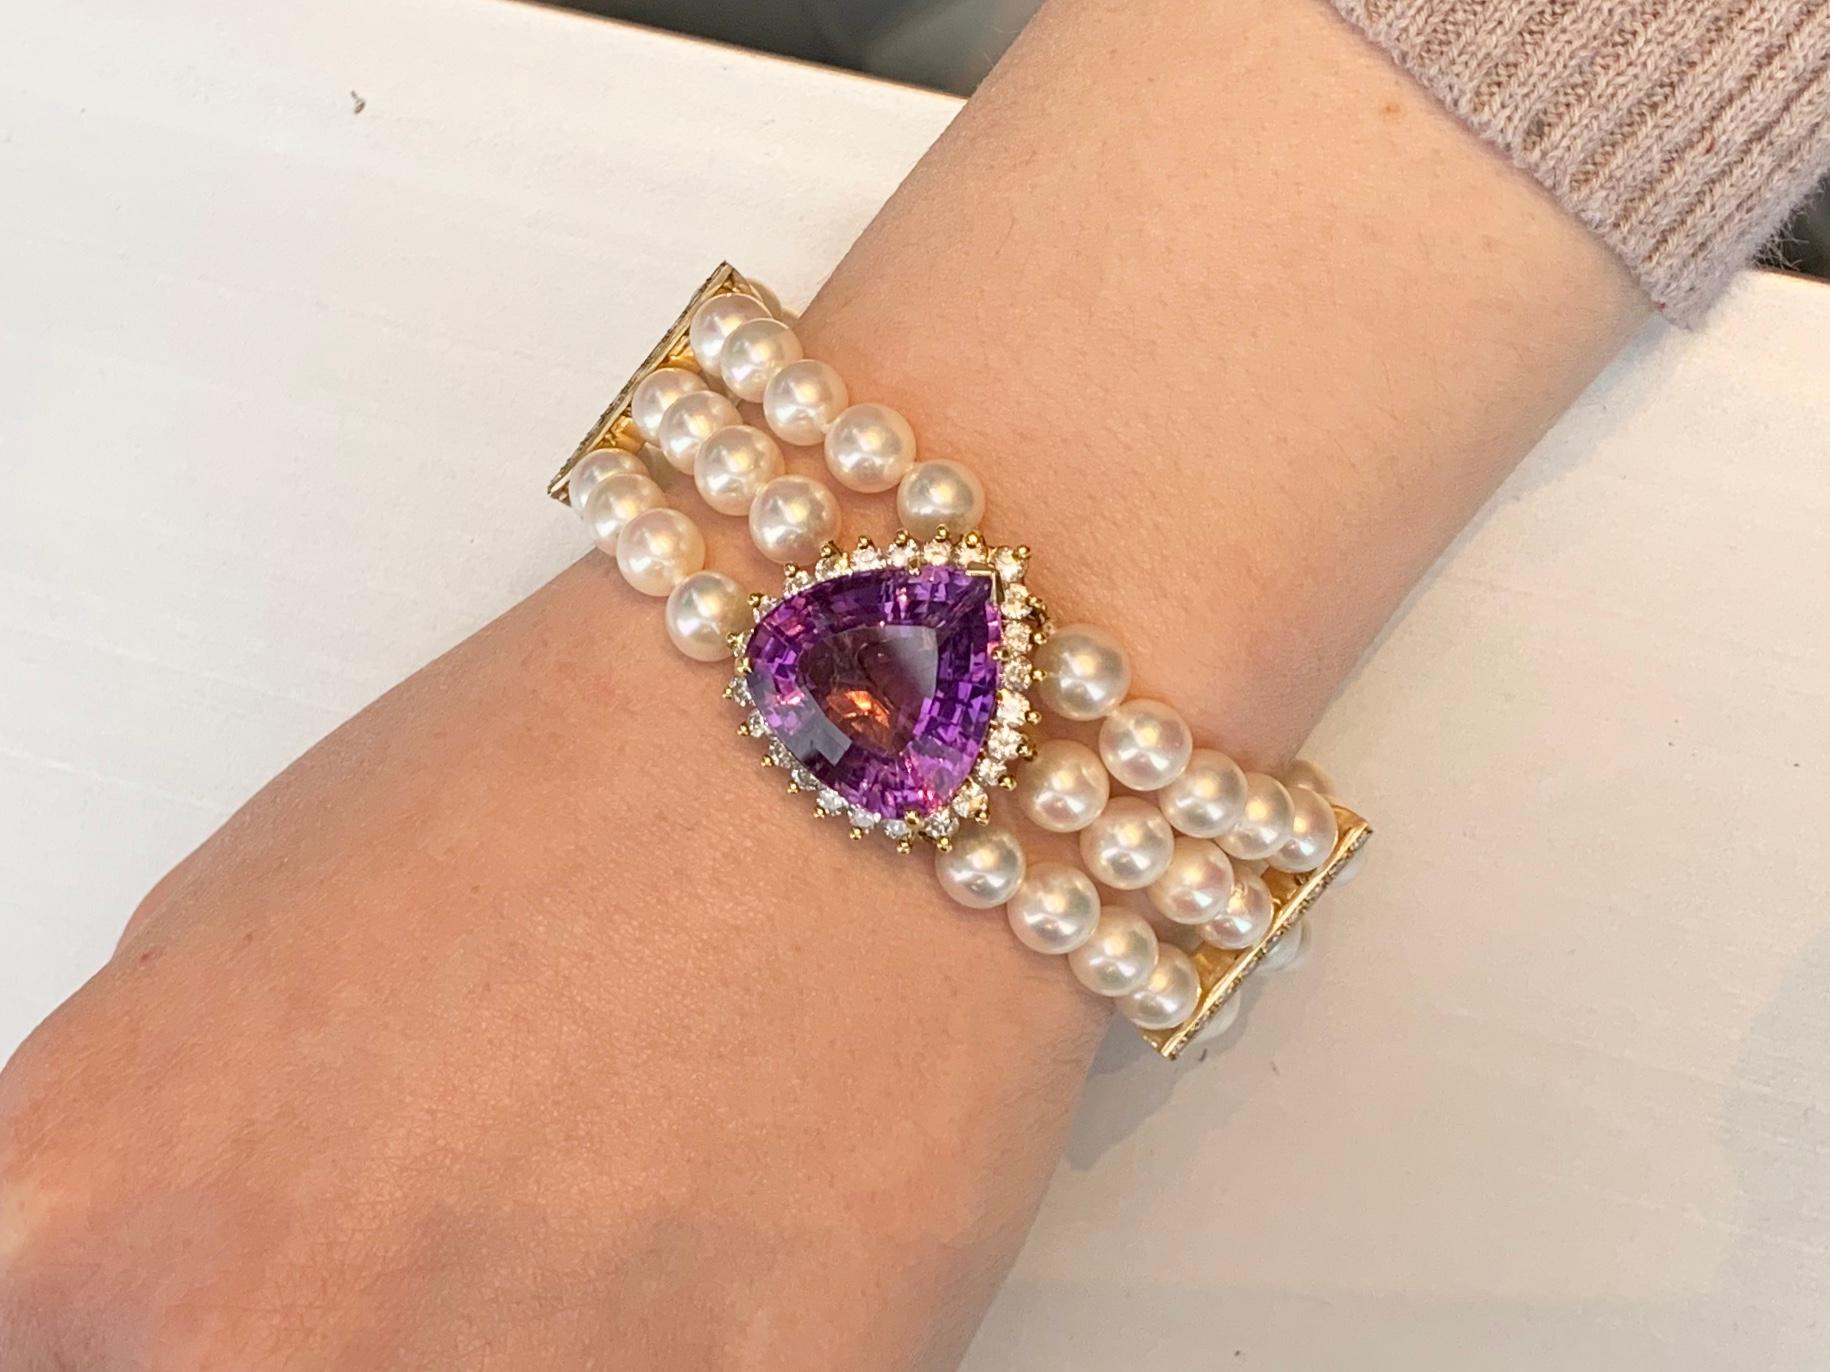 18 Karat Three-Strand Pearl Bracelet with Amethyst and Diamond Center For Sale 6